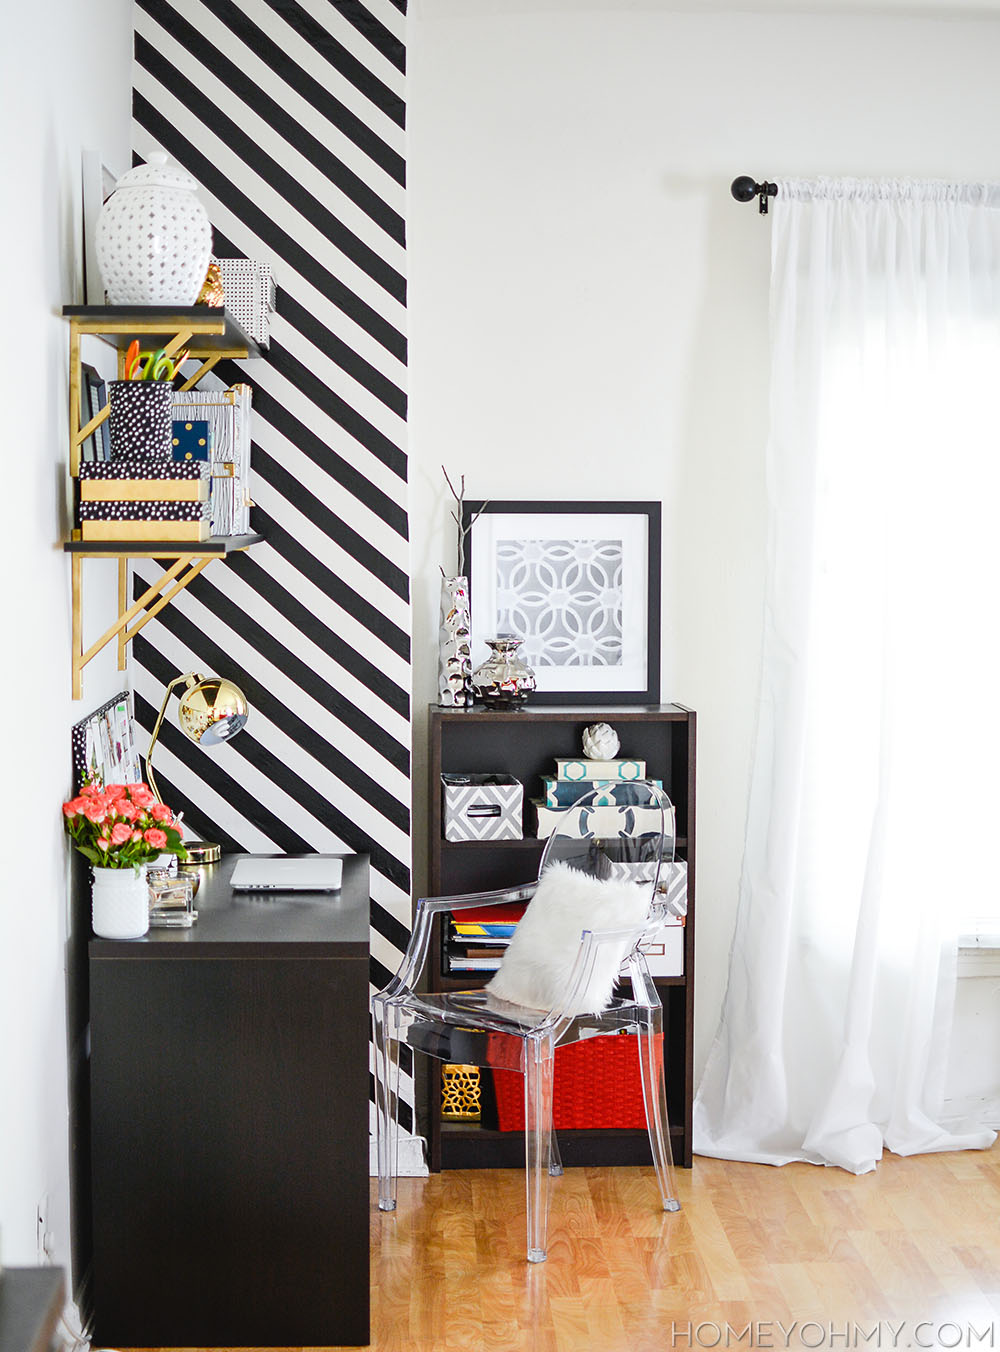 How to create a striped accent wall without paint.